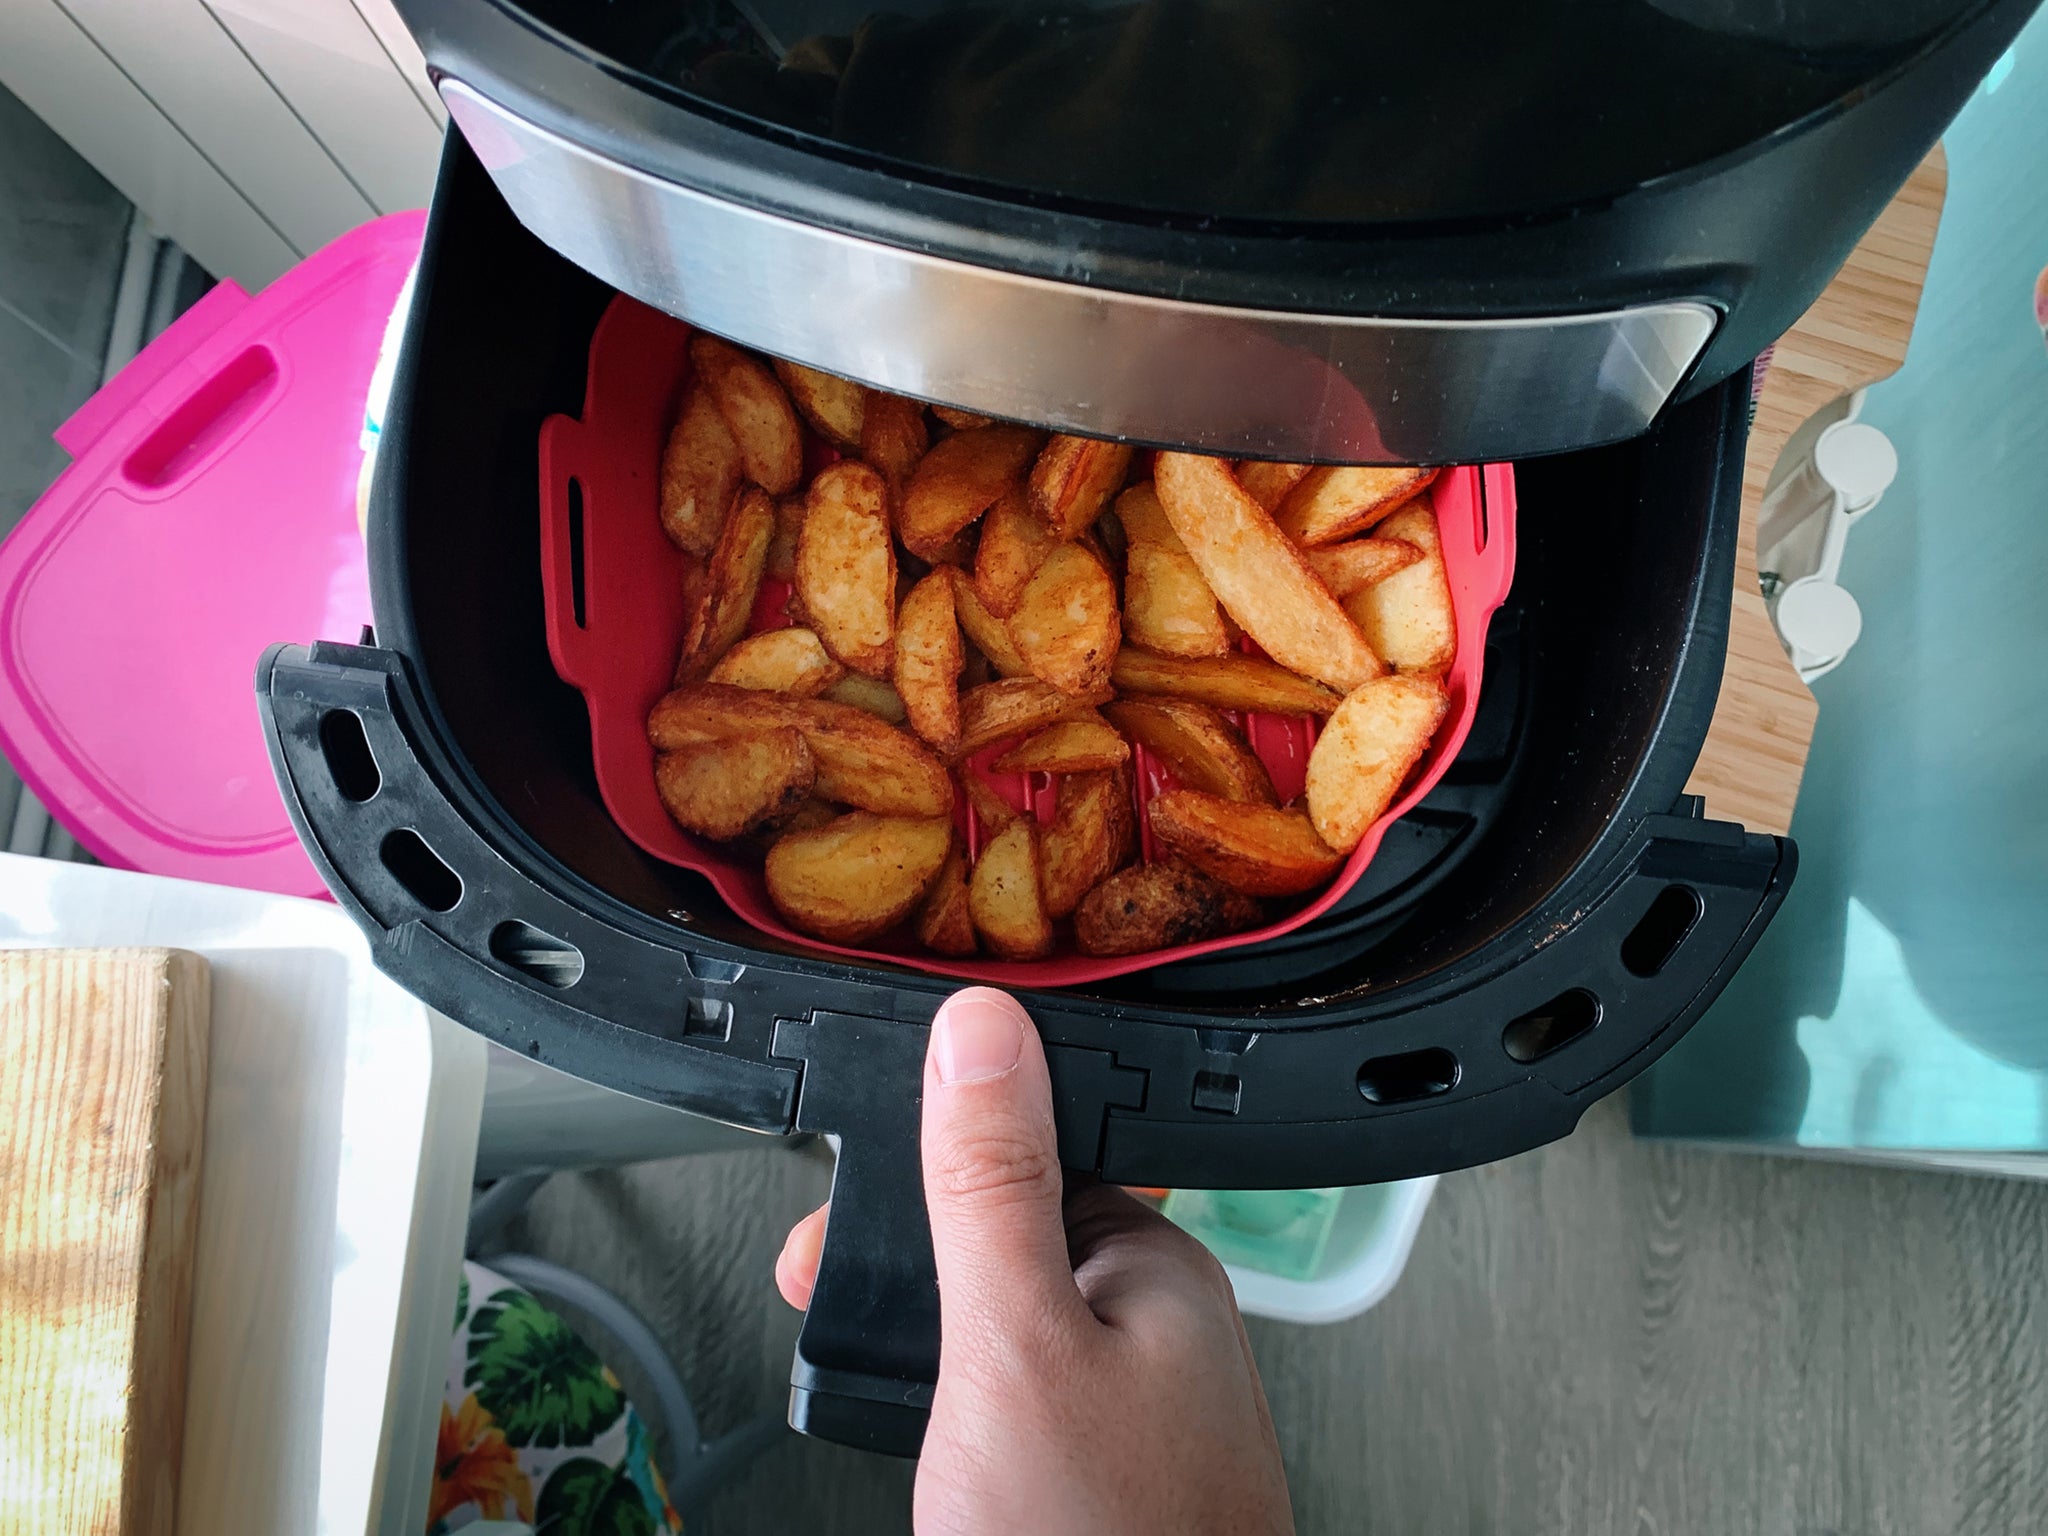 Homemade French Fries Cooked to Crispy Perfection in the Air Fryer